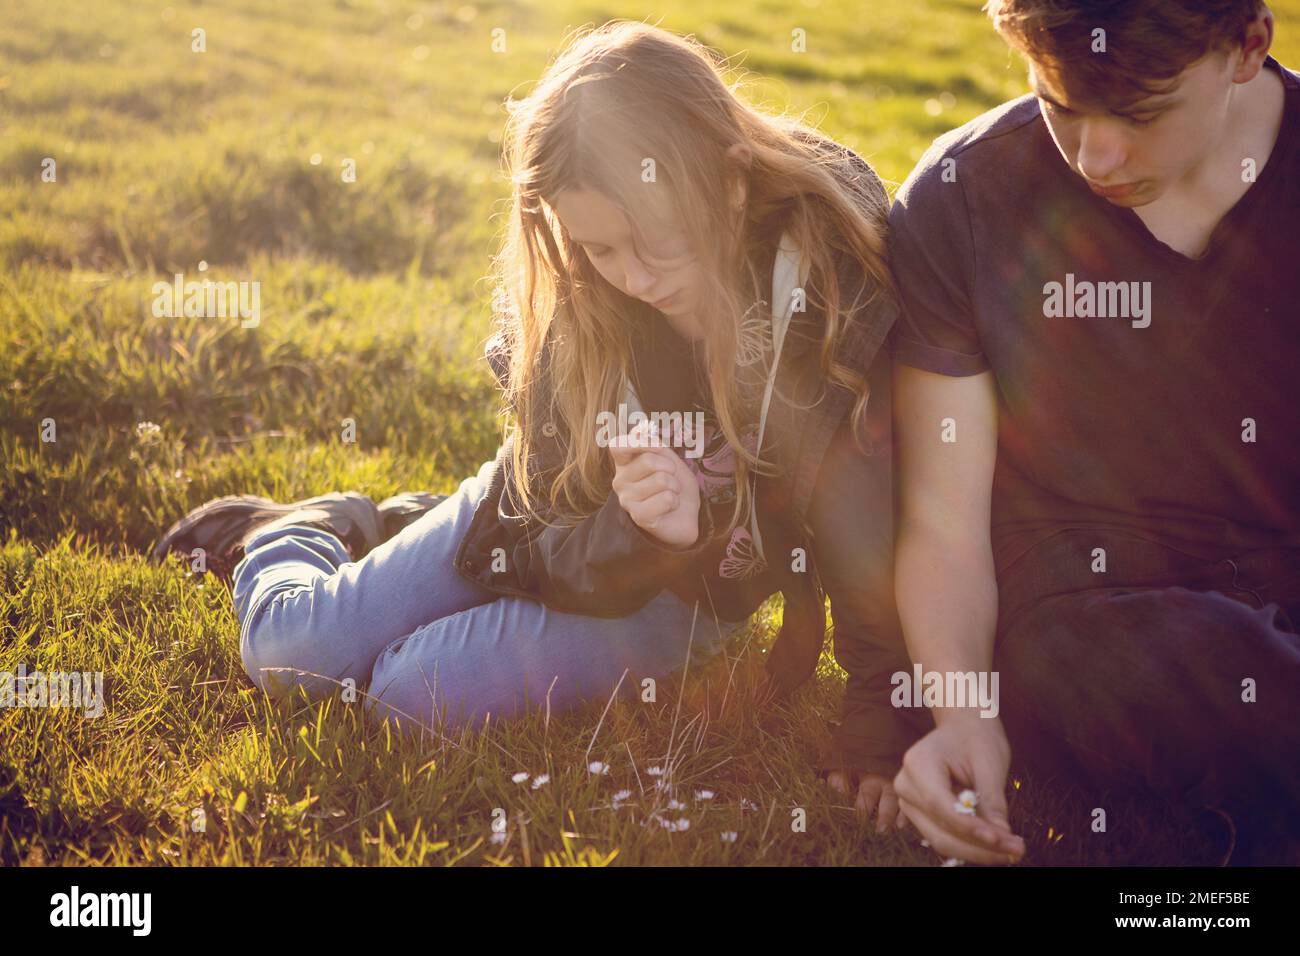 Brother and sister, siblings, boy and girl, children during sunset, on a lawn, grass, observing flowers and nature. Sharing, lovely family moment Stock Photo